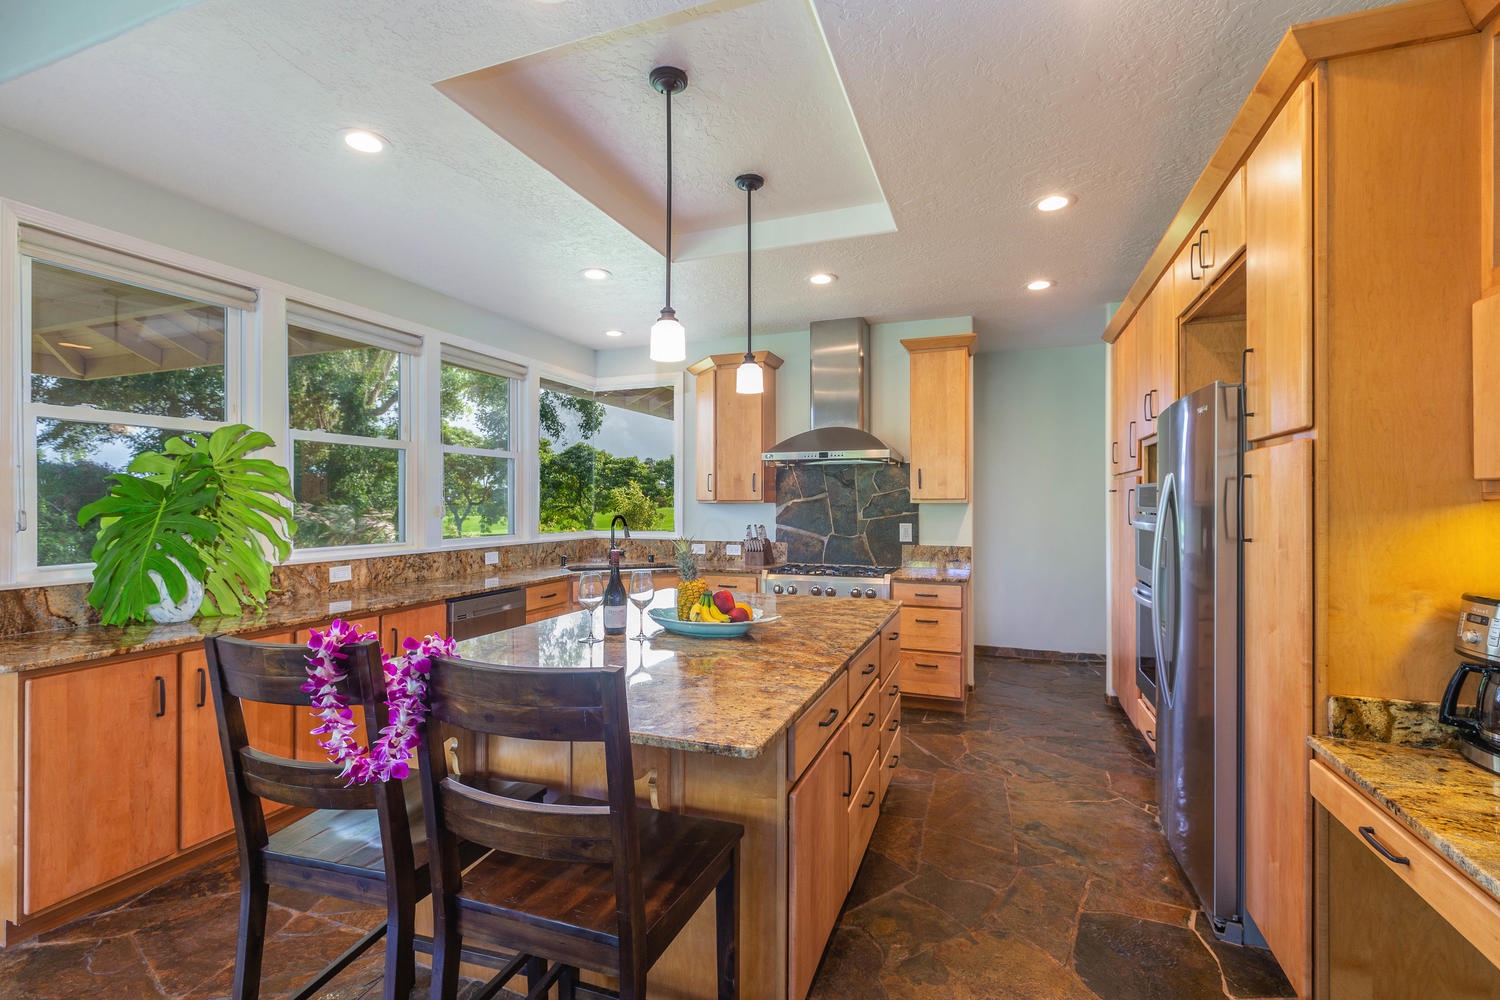 Princeville Vacation Rentals, Pohaku Villa - The kitchen island/bar for quick meals and entertainment.